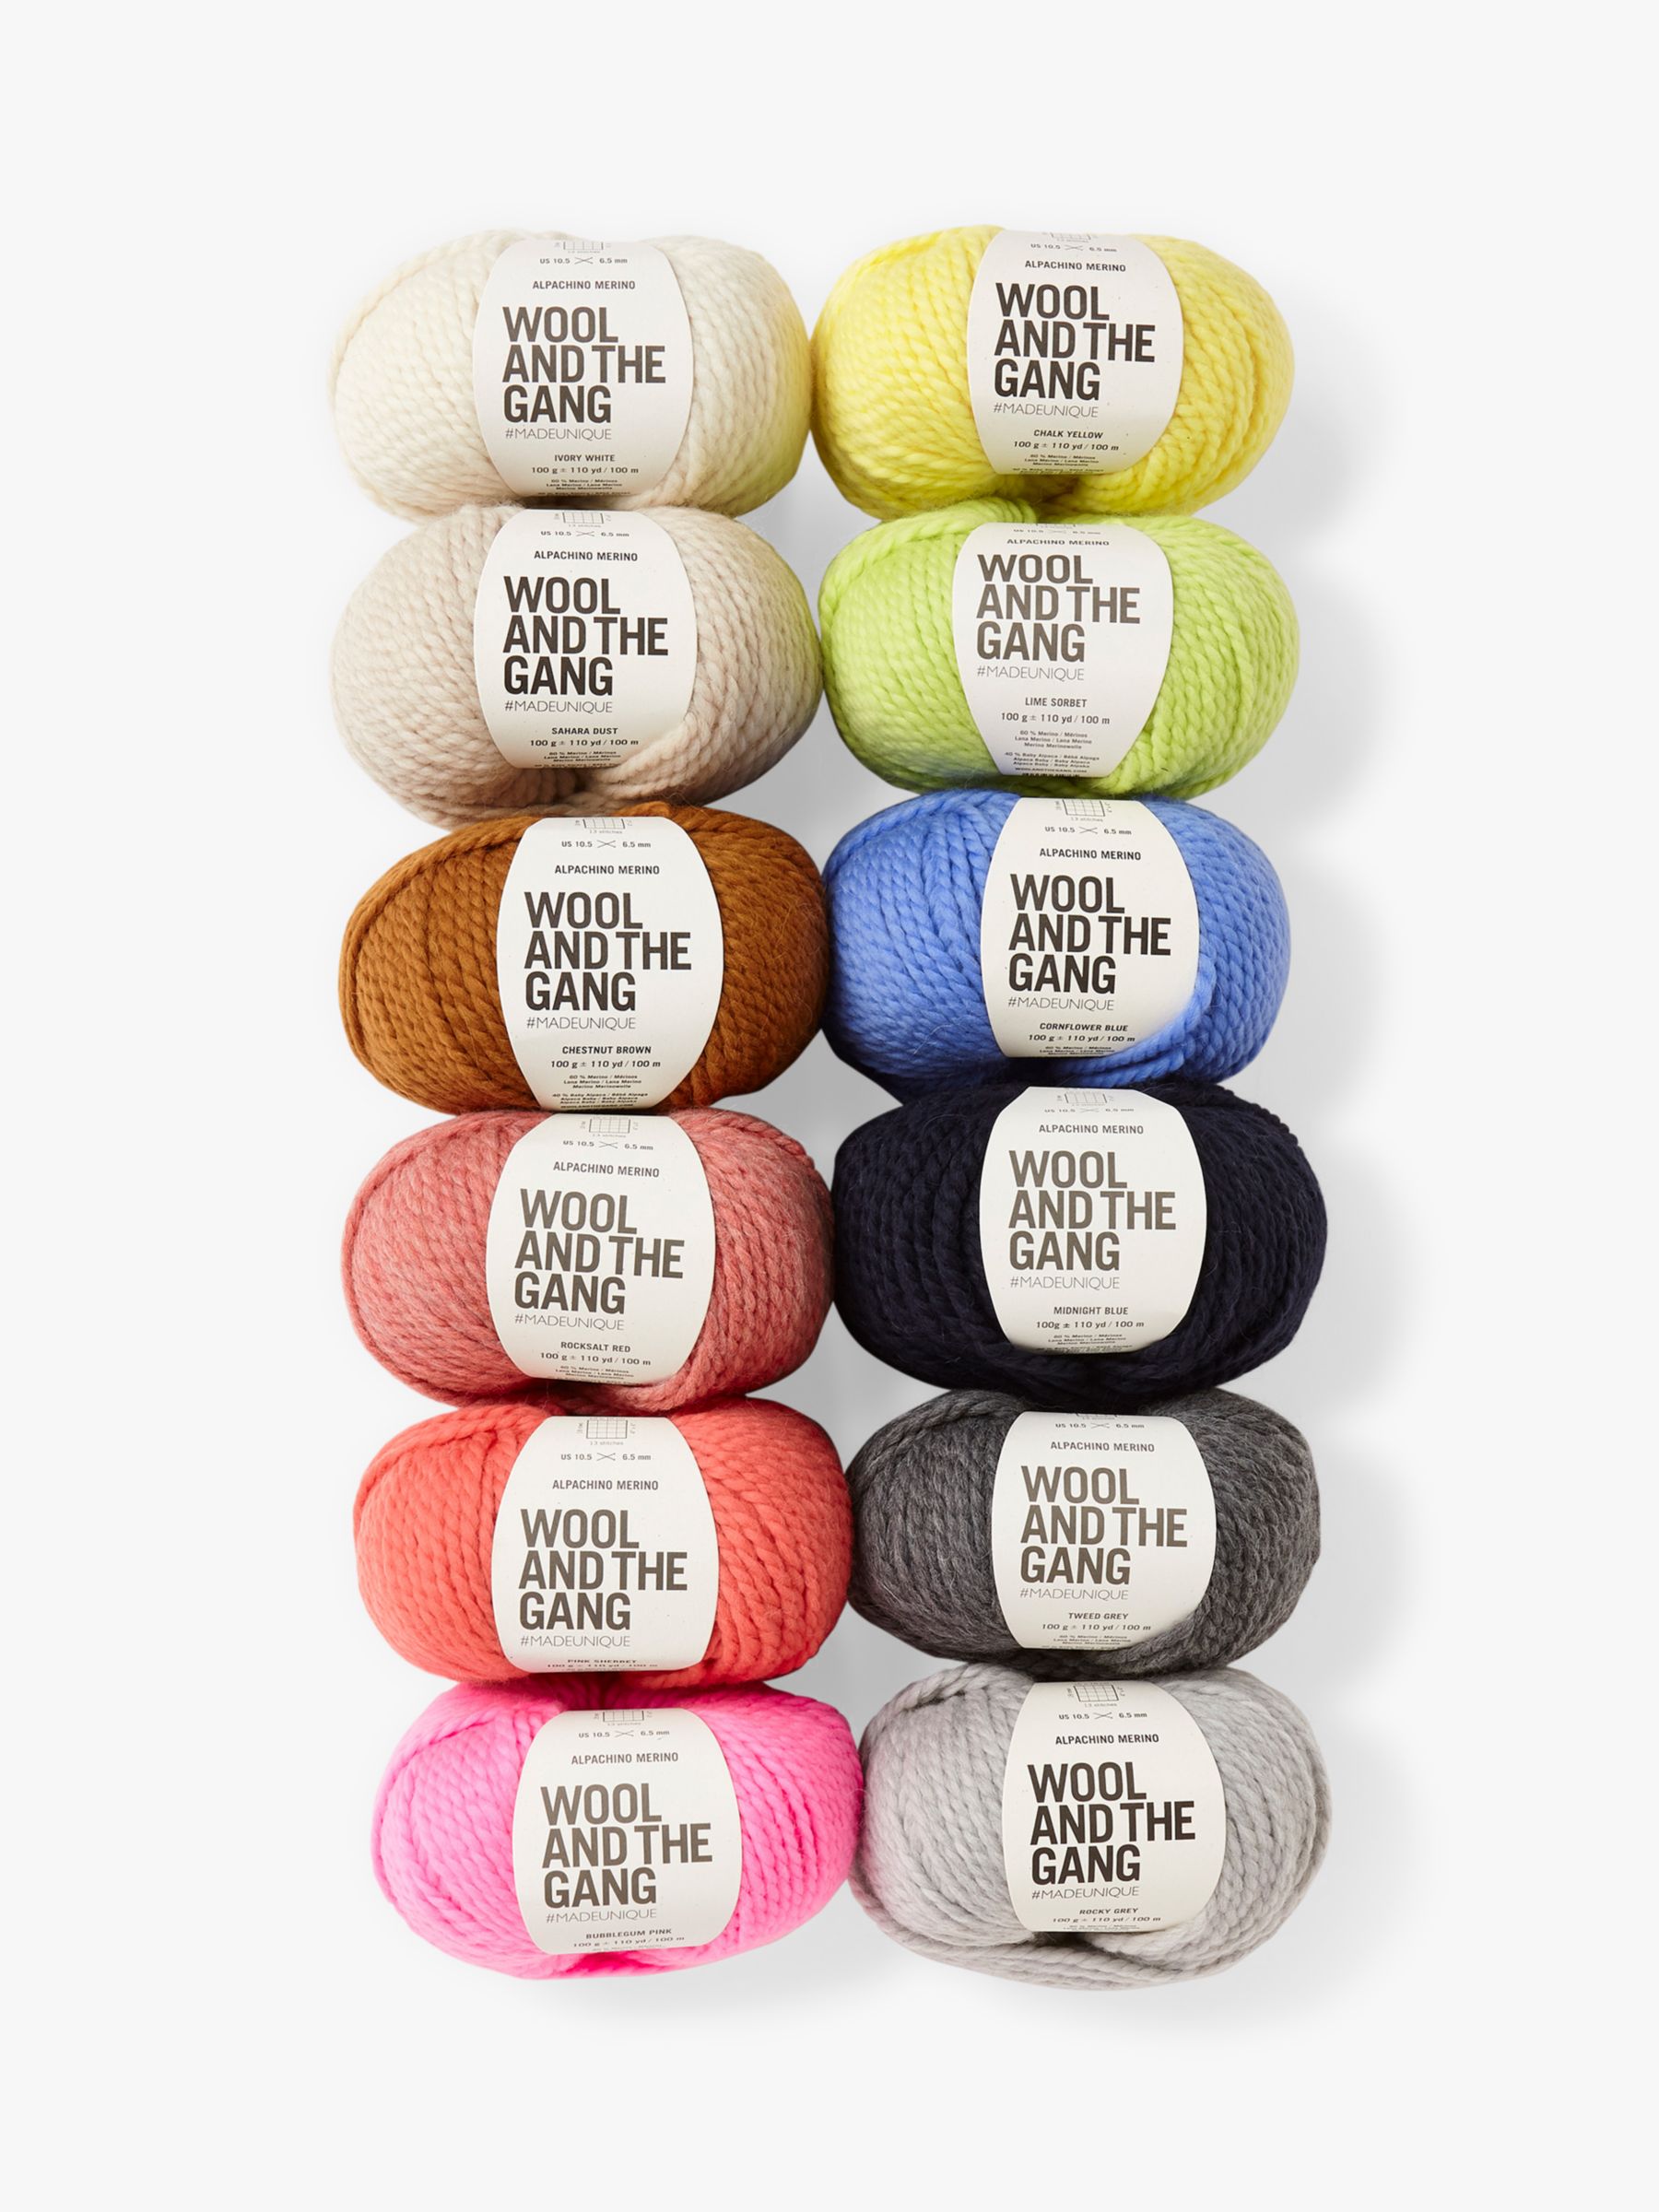 The best baby knitting yarn for your next knitting or crochet project